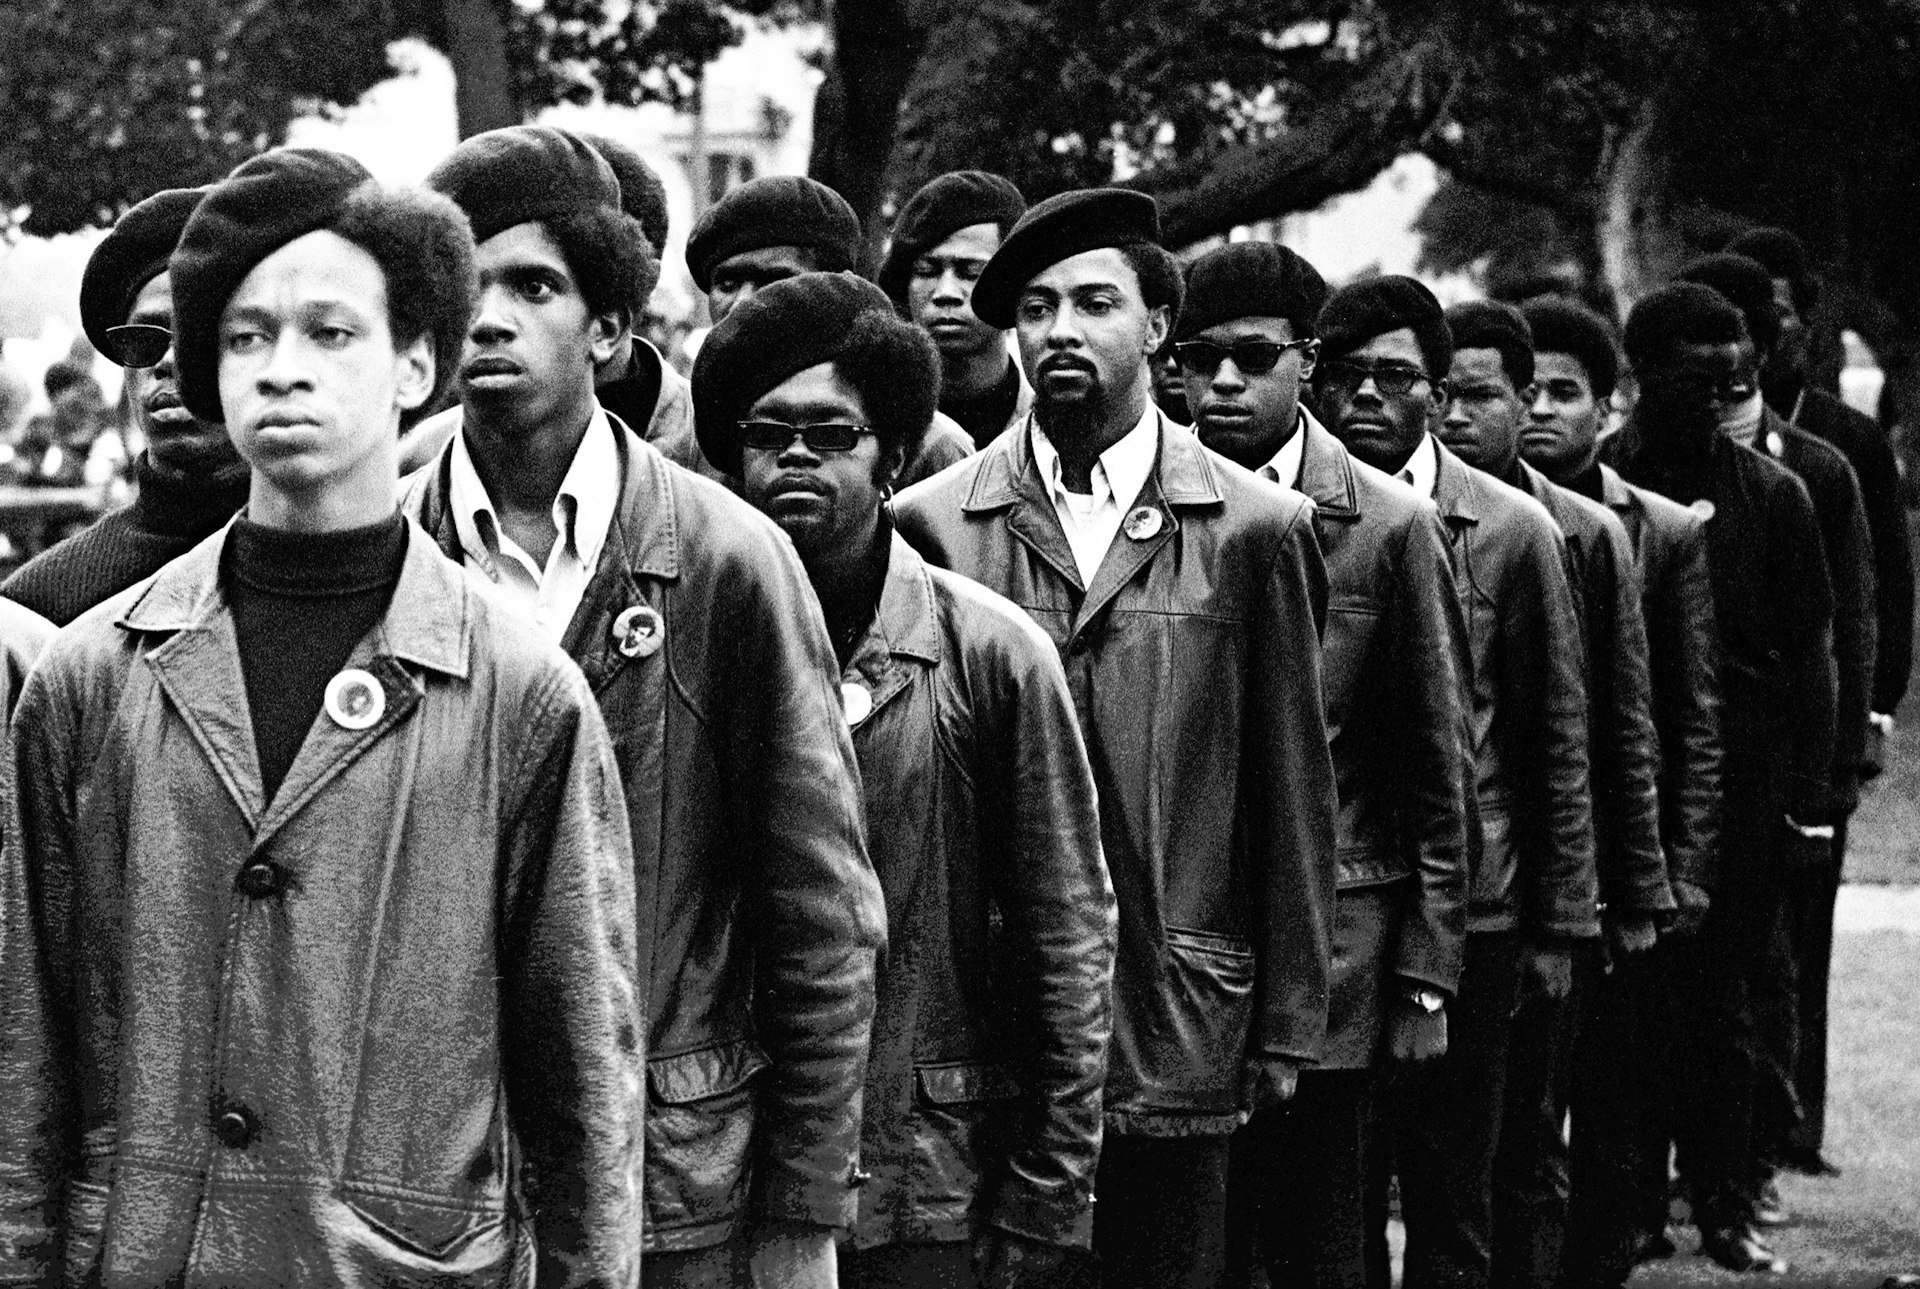 Panthers line up at a Free Huey rally in DeFremery Park, Oakland, July 28, 1968. The light-skinned man is Gregory Harrison. His brother, Oleander, was in the group that went to Sacramento.